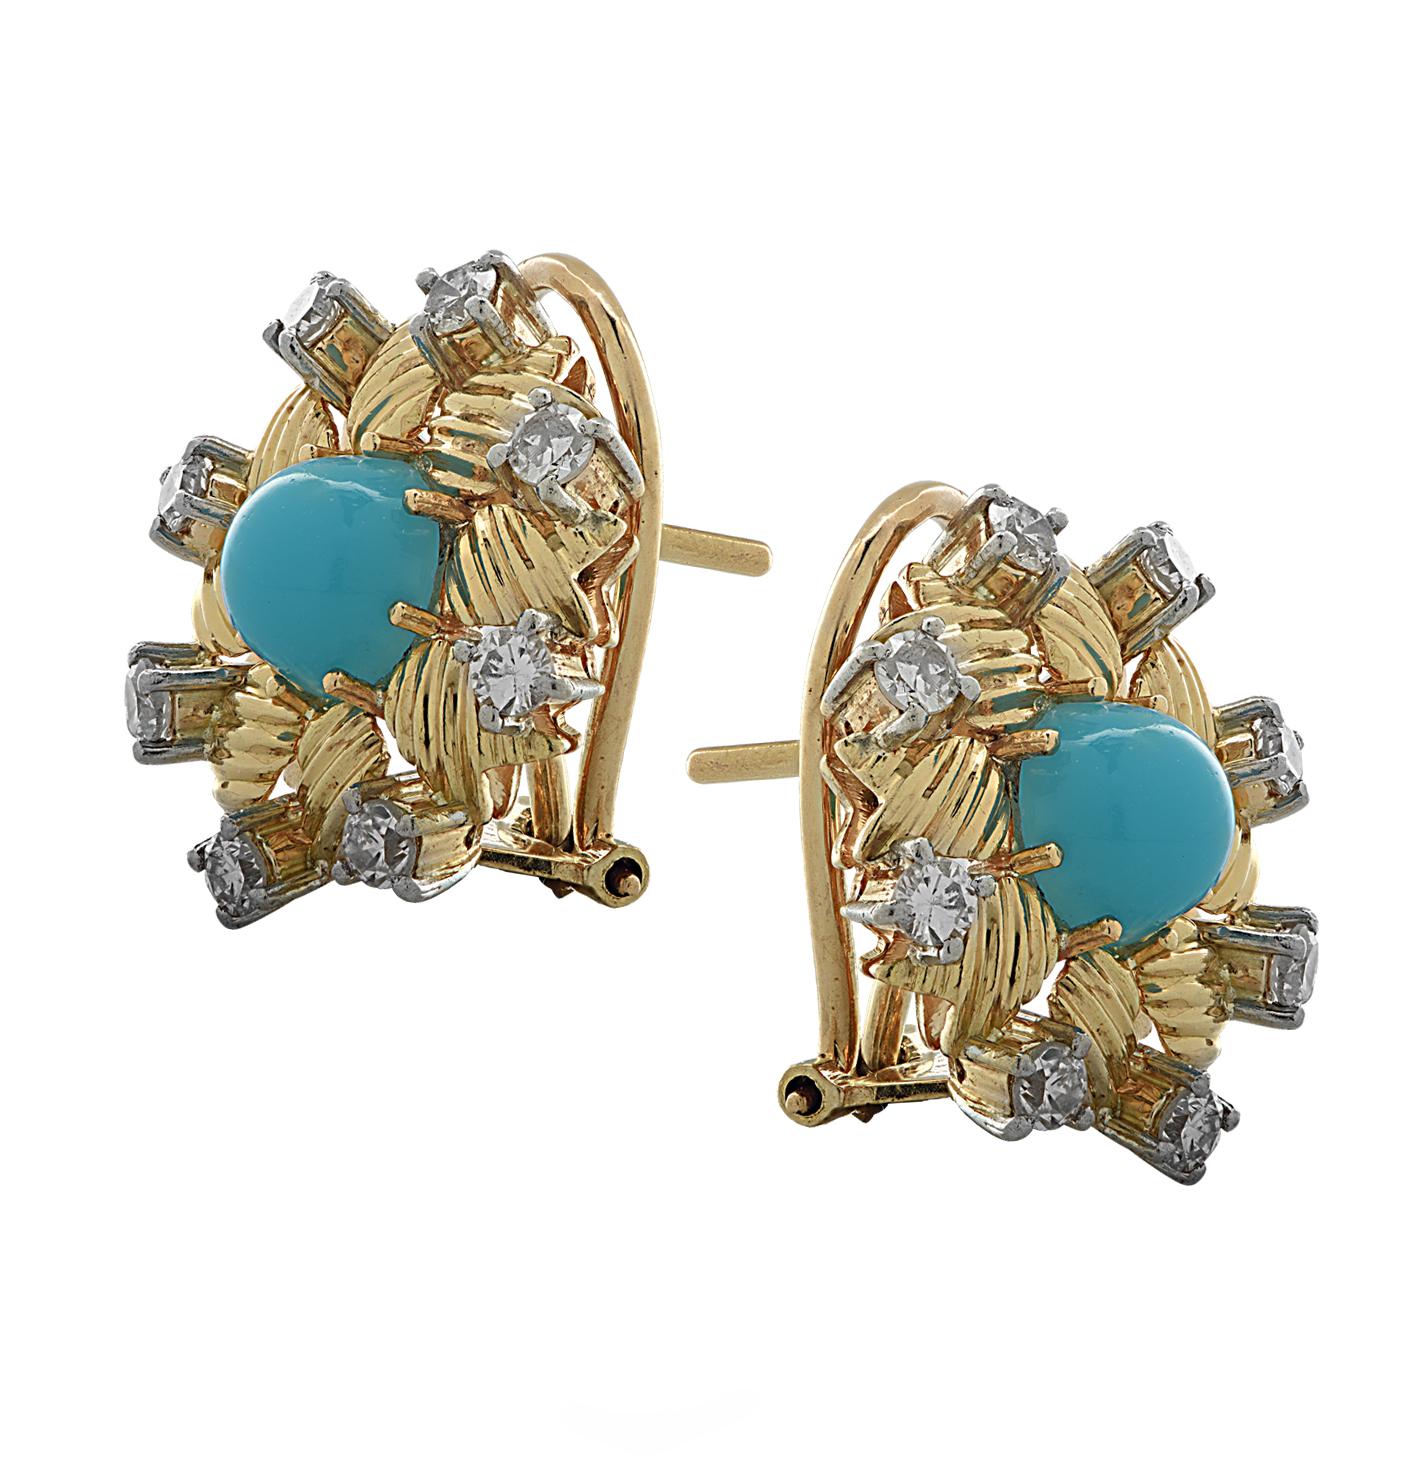 Beautiful stud earrings crafted in 18 karat yellow gold and platinum, fashioned into flowers, with textured yellow gold petals and blue turquoise cabochon centers, adorned with 16 transitional cut diamonds weighing approximately .50 carats total, G